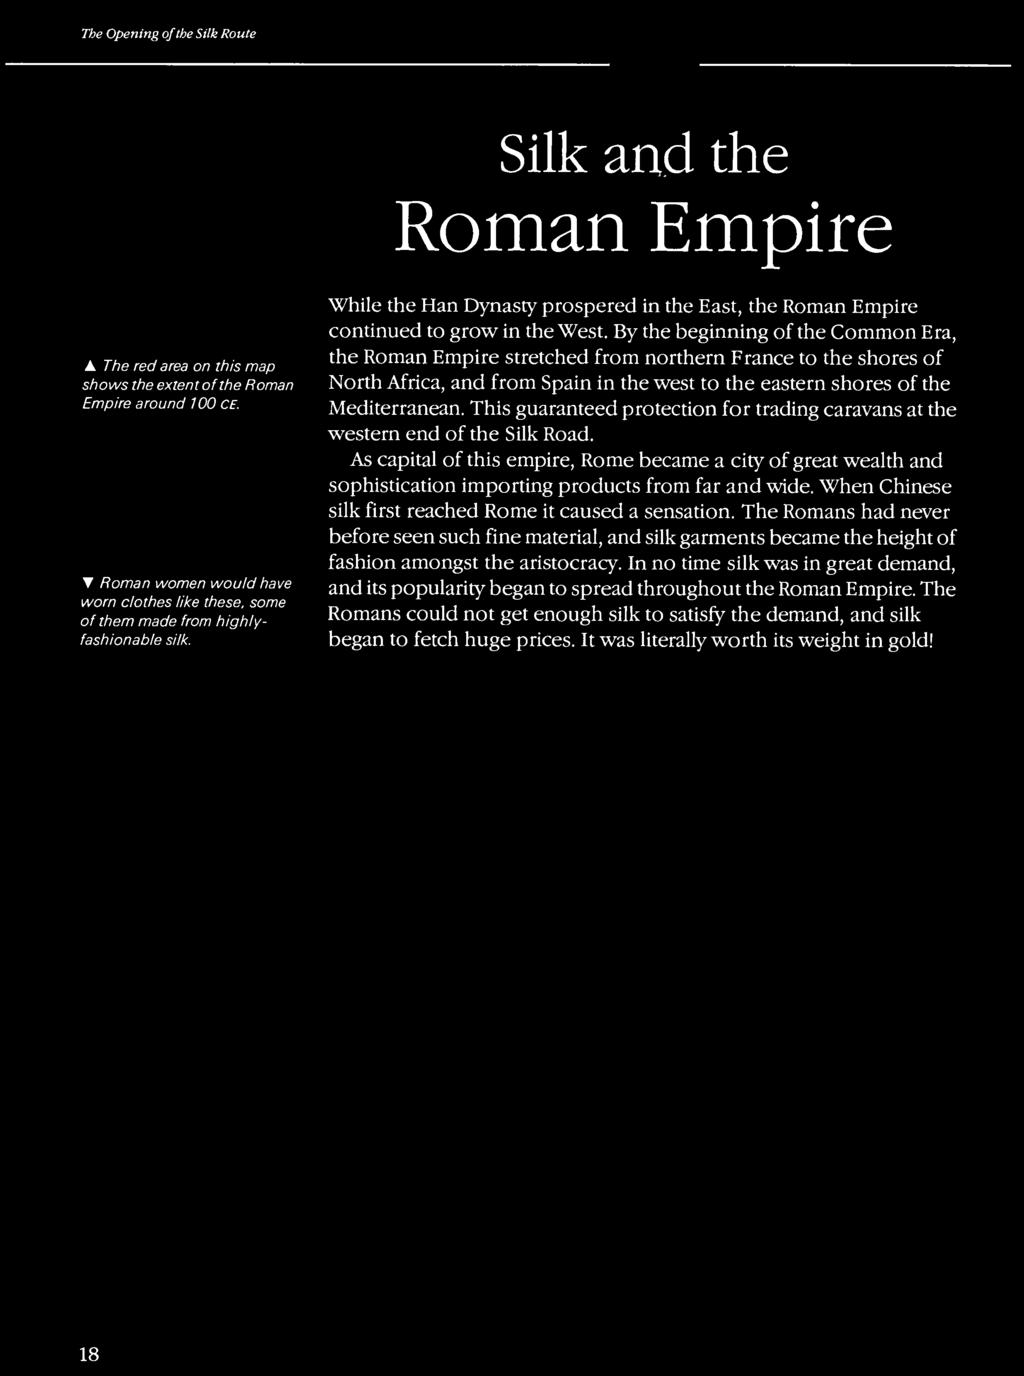 the Roman Empire stretched from northern France to the shores of North Africa, and from Spain in the west to the eastern shores of the Mediterranean.